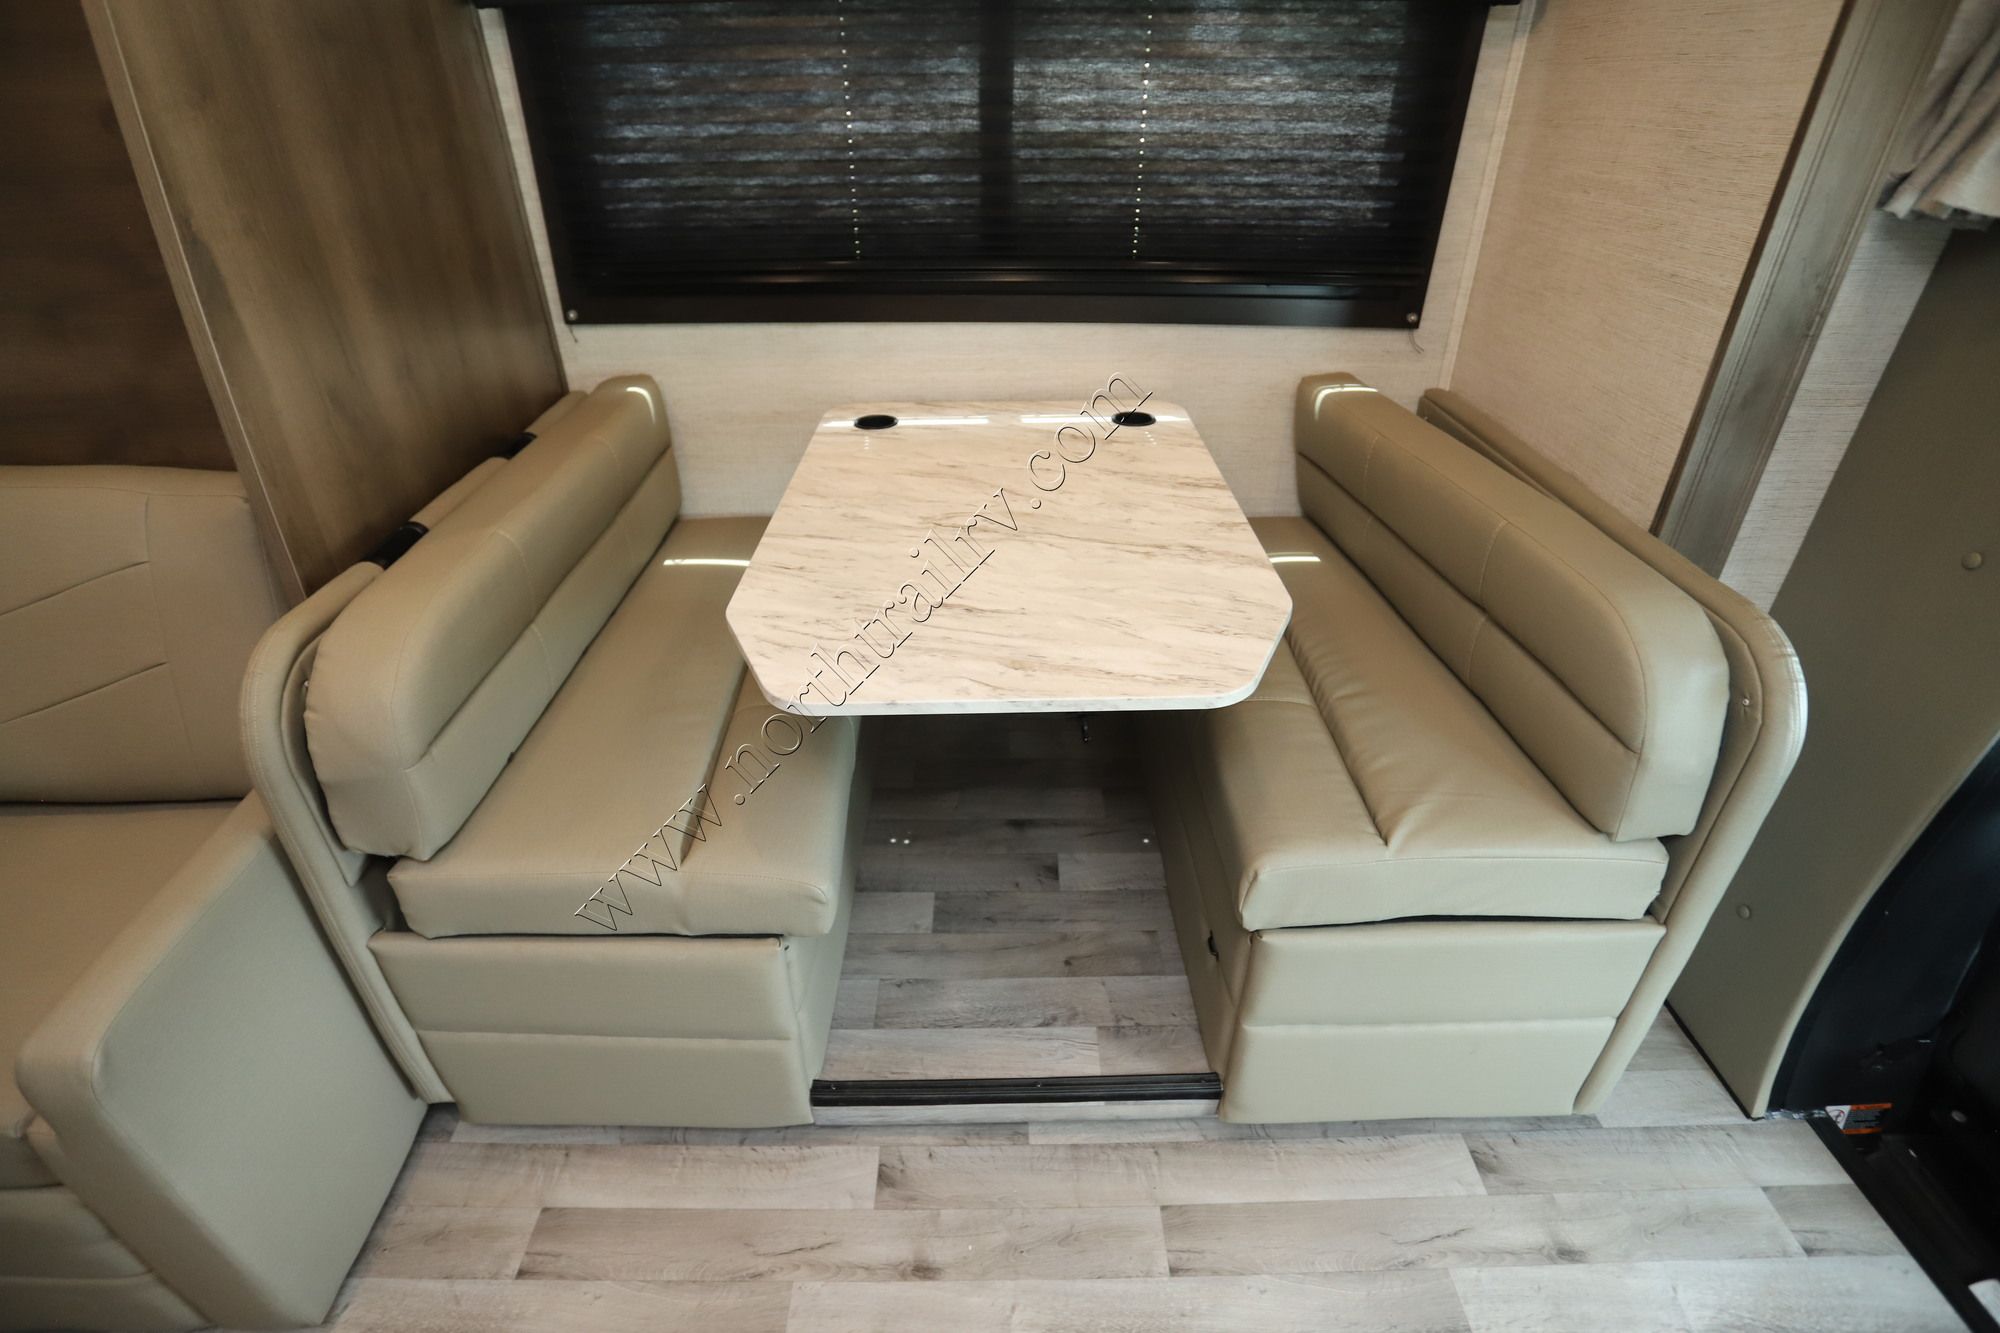 New 2022 Jayco Melbourne 24R Class C  For Sale